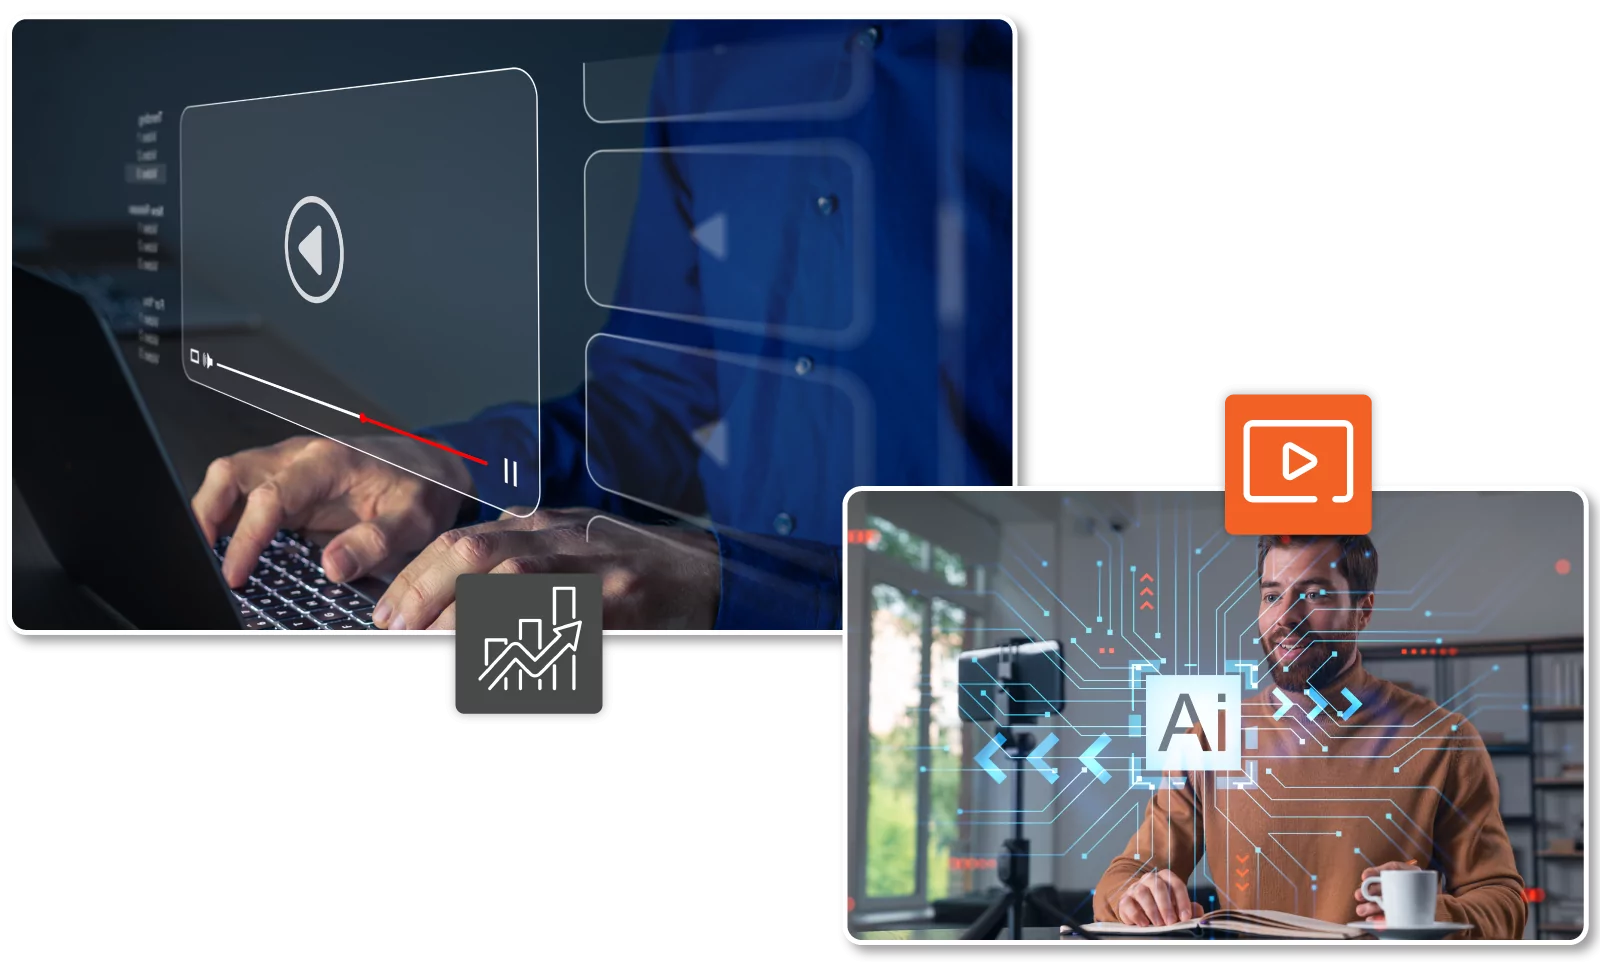 Tailoring-smart-video-solutions-for-your-organization’s-AI-needs